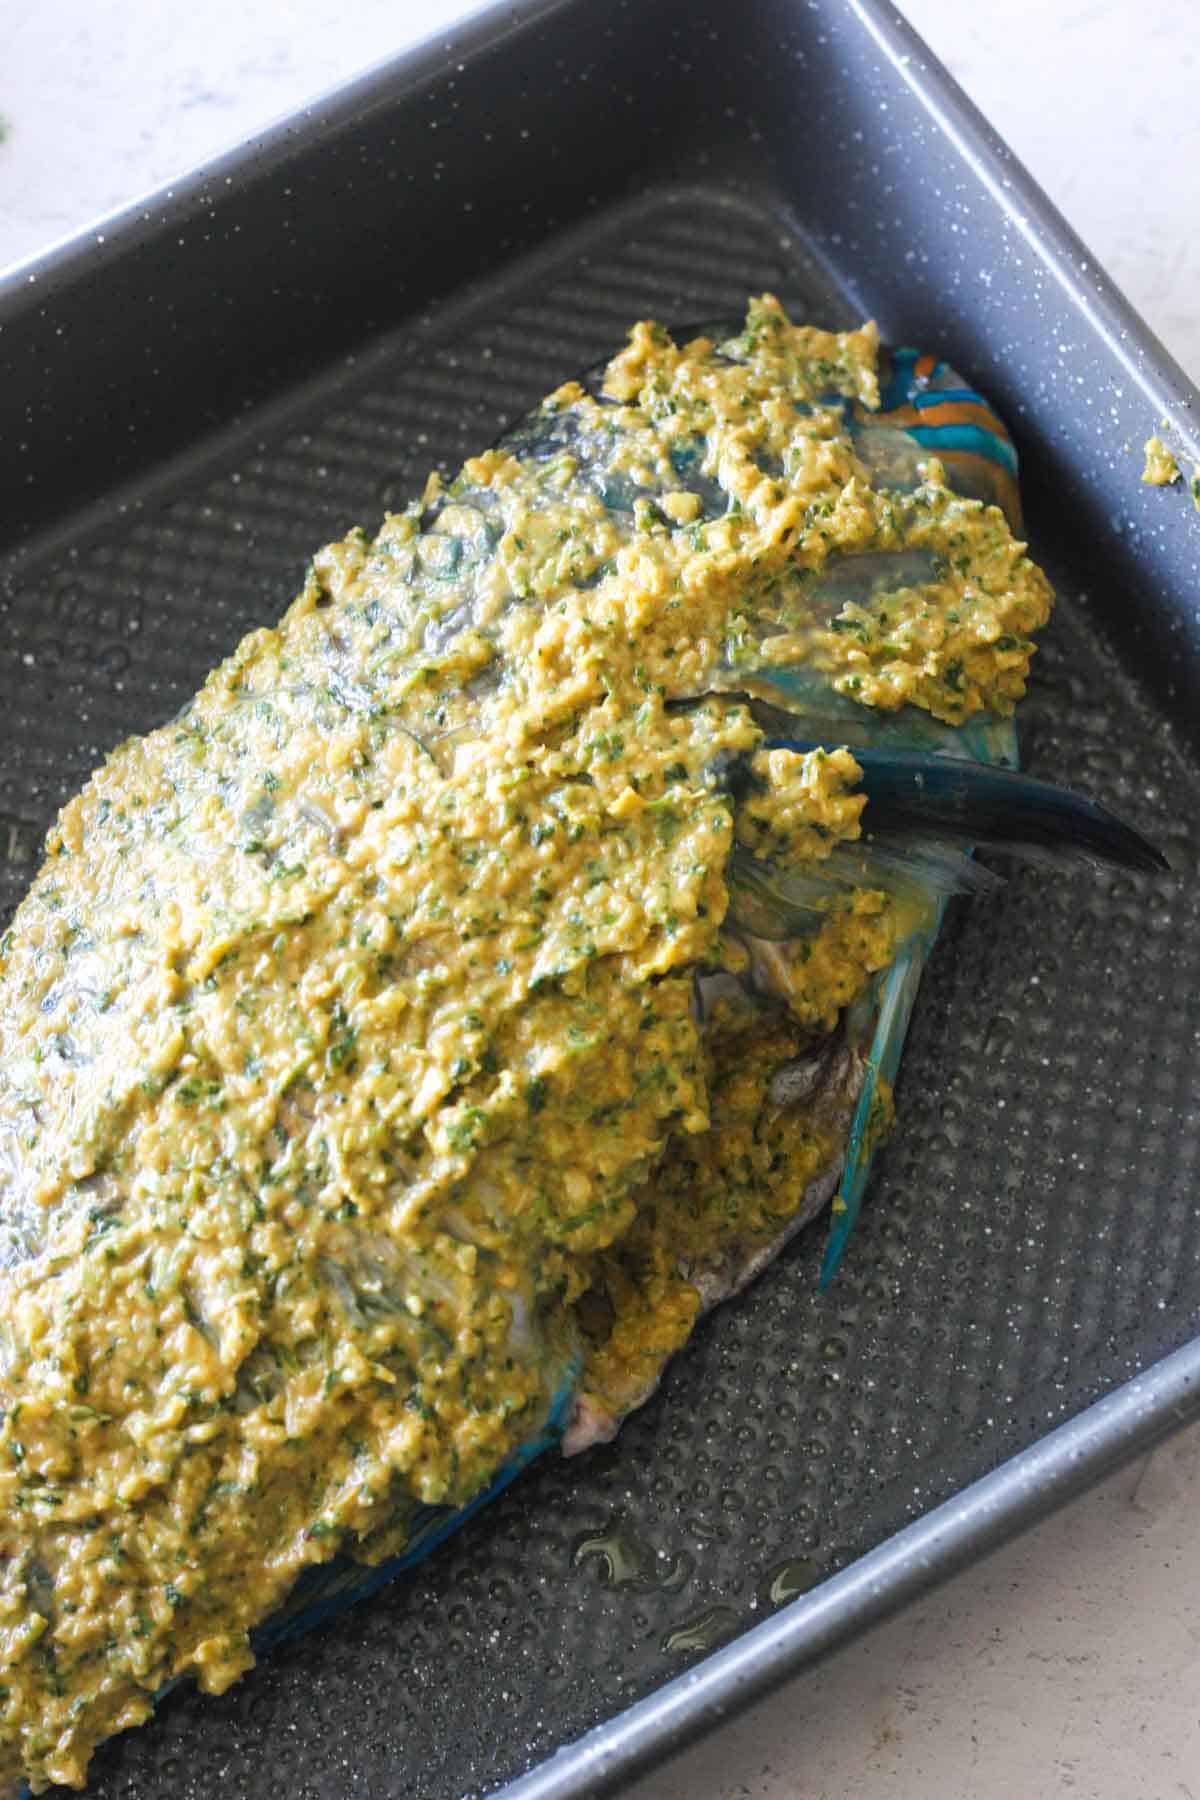 seasoned and marinated parrot fish in the baking tray